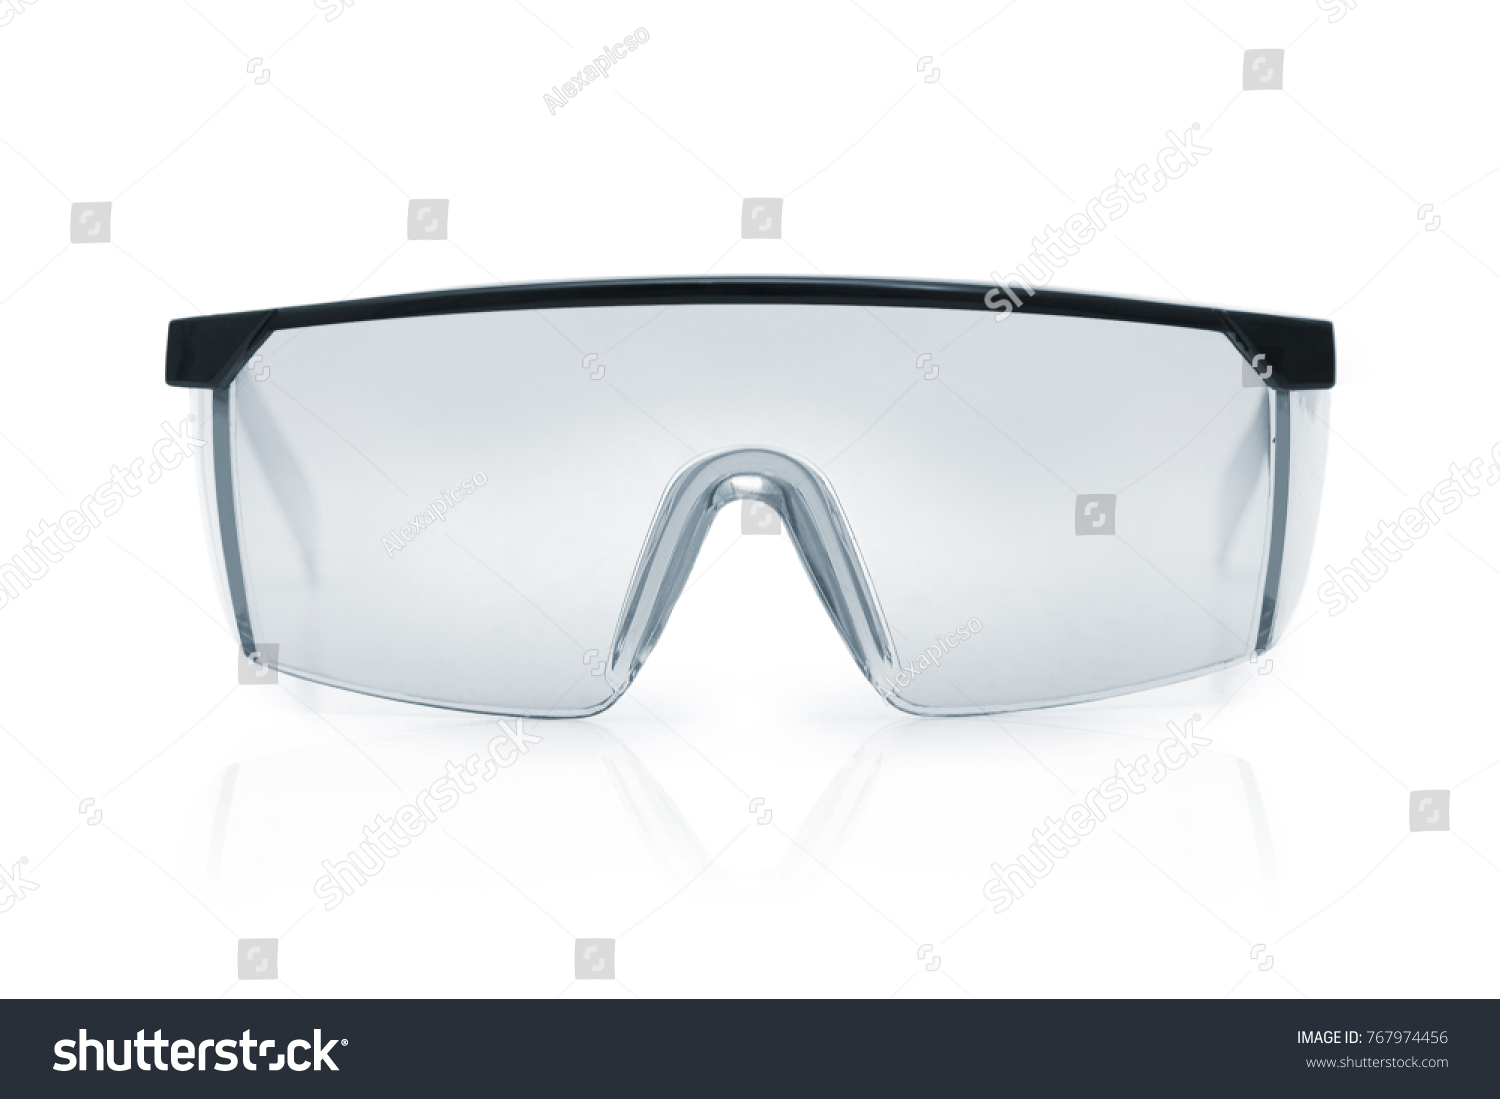 Goggles or Safety Glasses. Protective workwear to protect human eyes. Single object isolated over a white background. #767974456